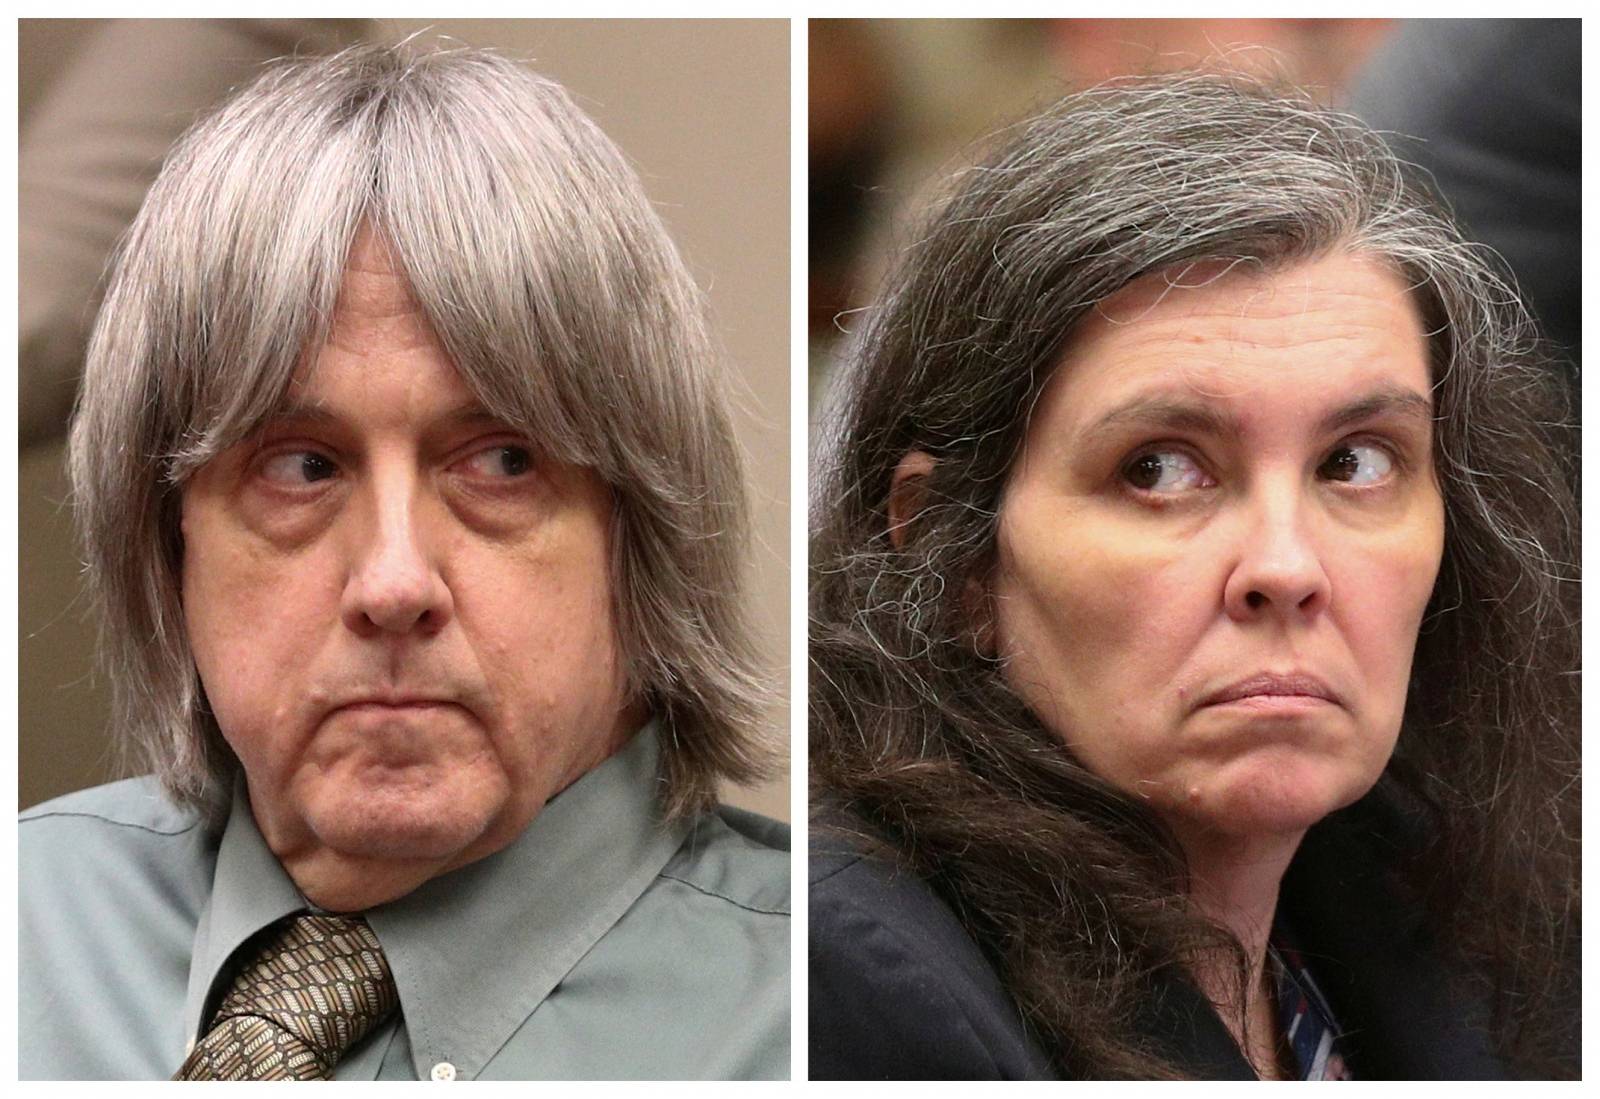 FILE PHOTO: FILE PHOTO: David Allen Turpin and Louise Anna Turpin making a court appearance in Riverside California